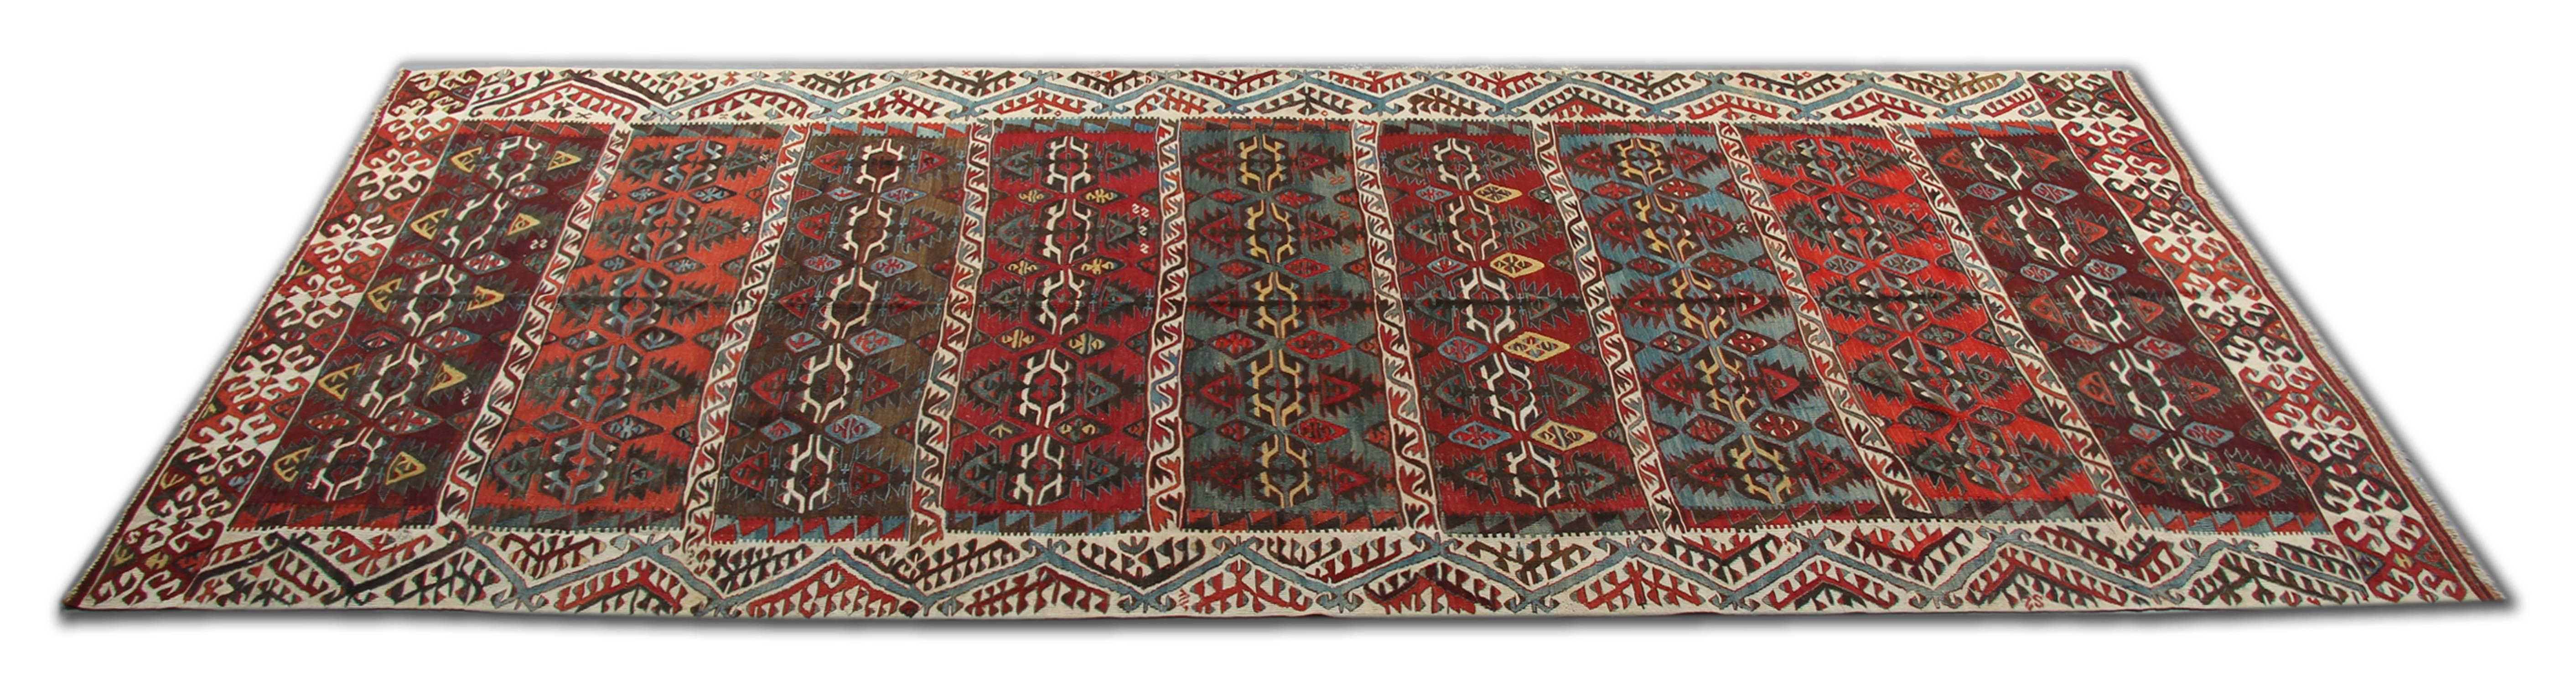 This handmade carpet Turkish rug is an antique rug traditional handwoven runner rug from Turkey. This carpet runner is suitable for stair runners and hallway rugs in a striking combination of bright red, shiny yellow, navy, light blue, sea blue,